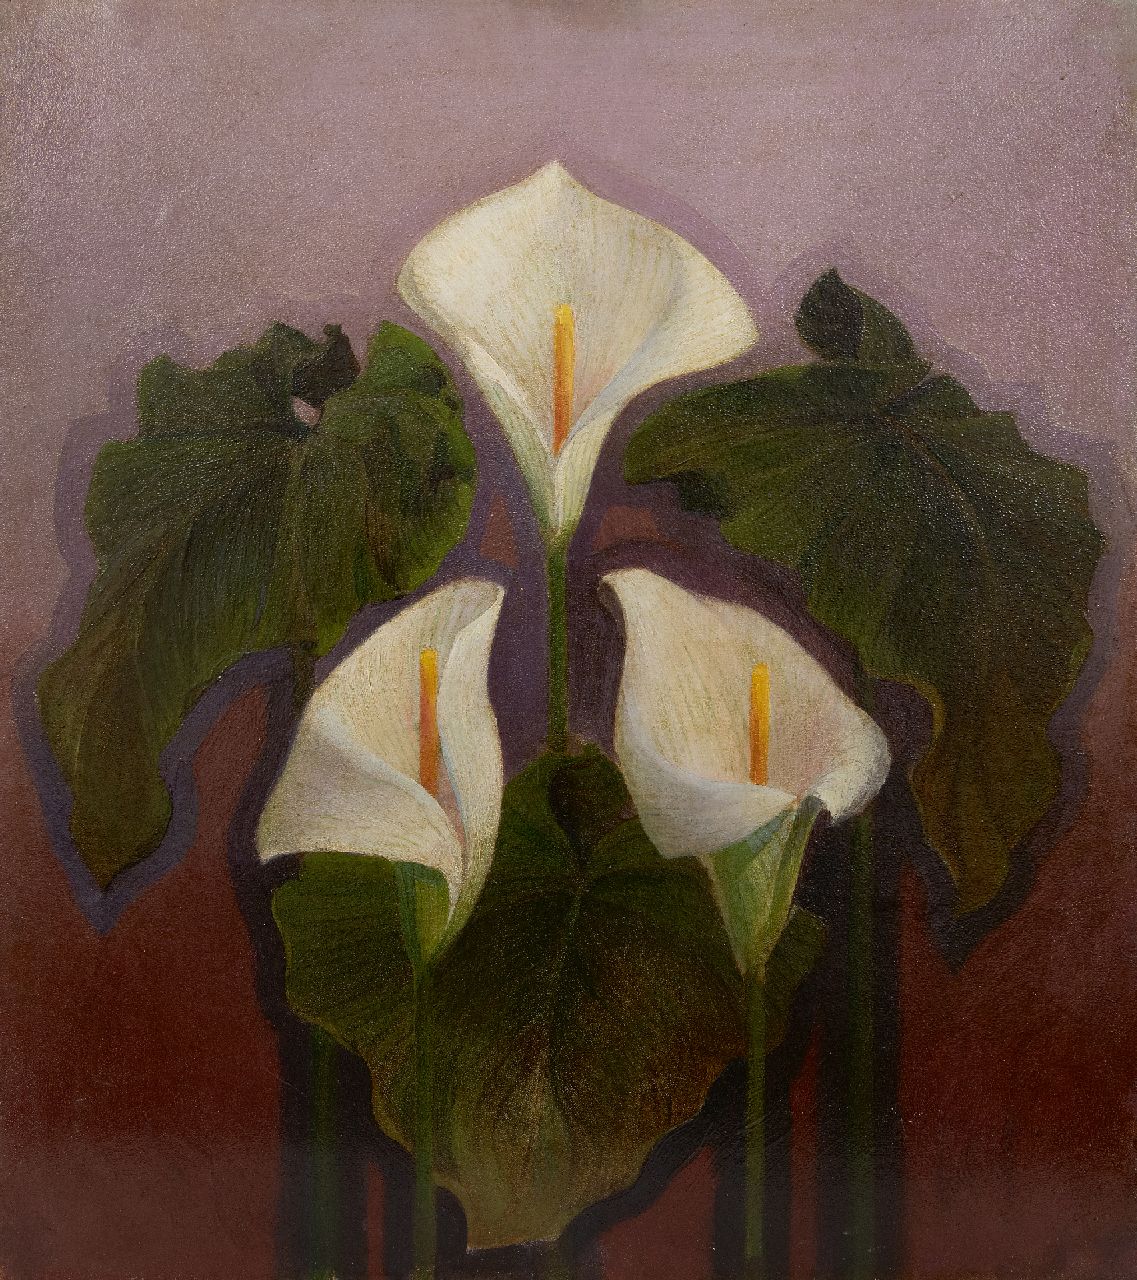 Verstraten D.  | Dirk Verstraten | Paintings offered for sale | Three white Arums, oil on paper laid down on board 48.3 x 42.3 cm, signed l.r.